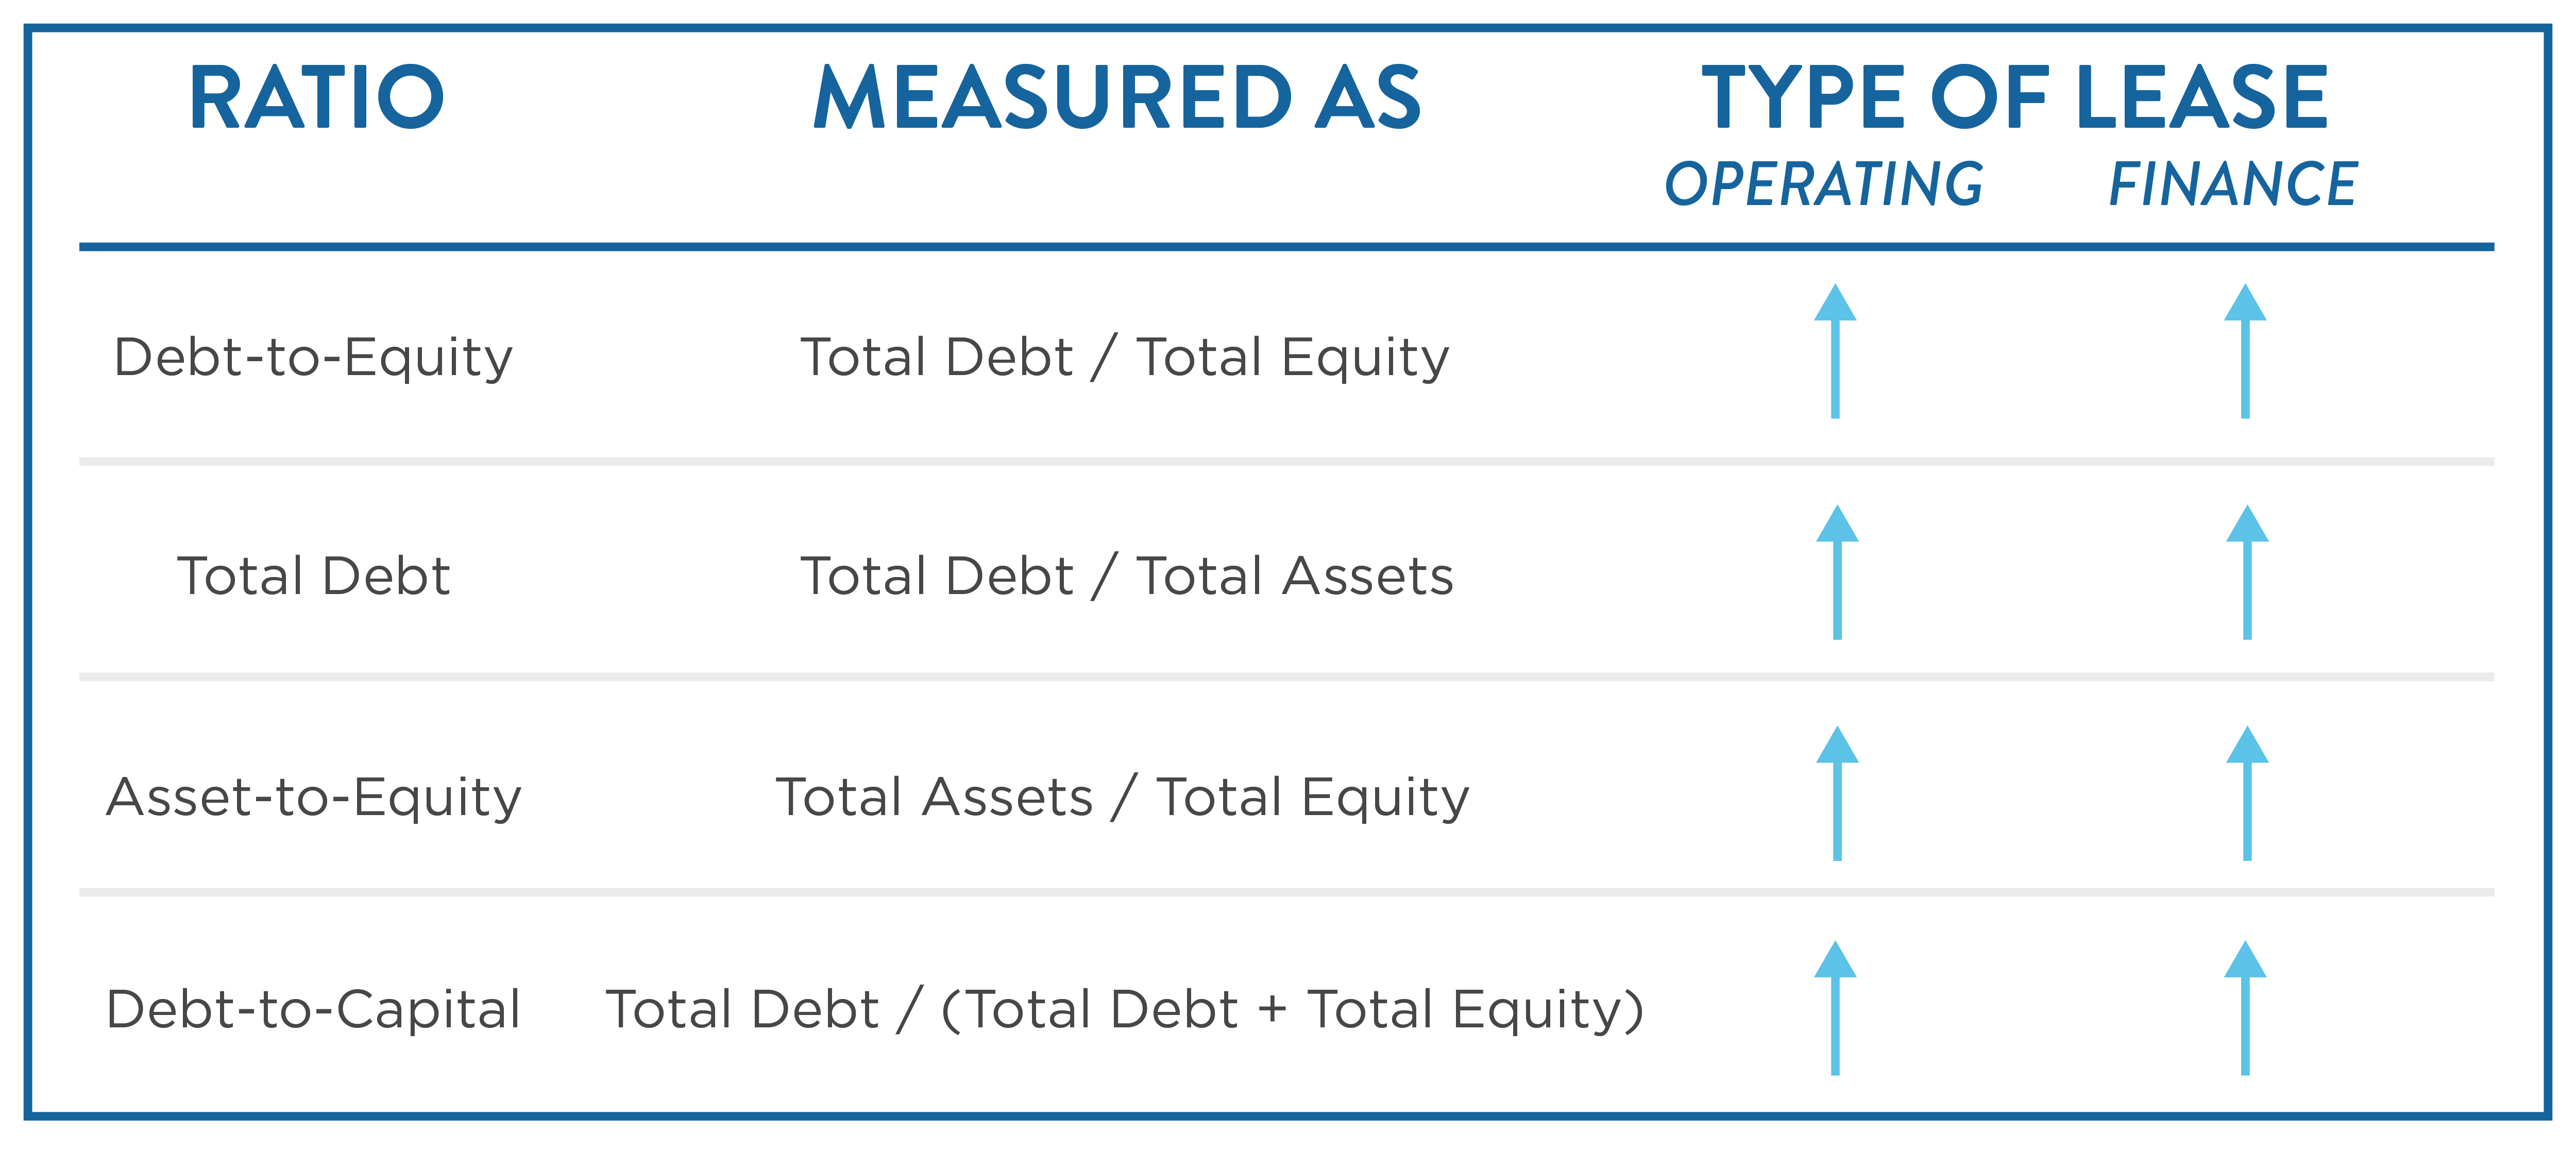 How Key Financial Ratios and Metrics Are Impacted by the New Lease Standard 5